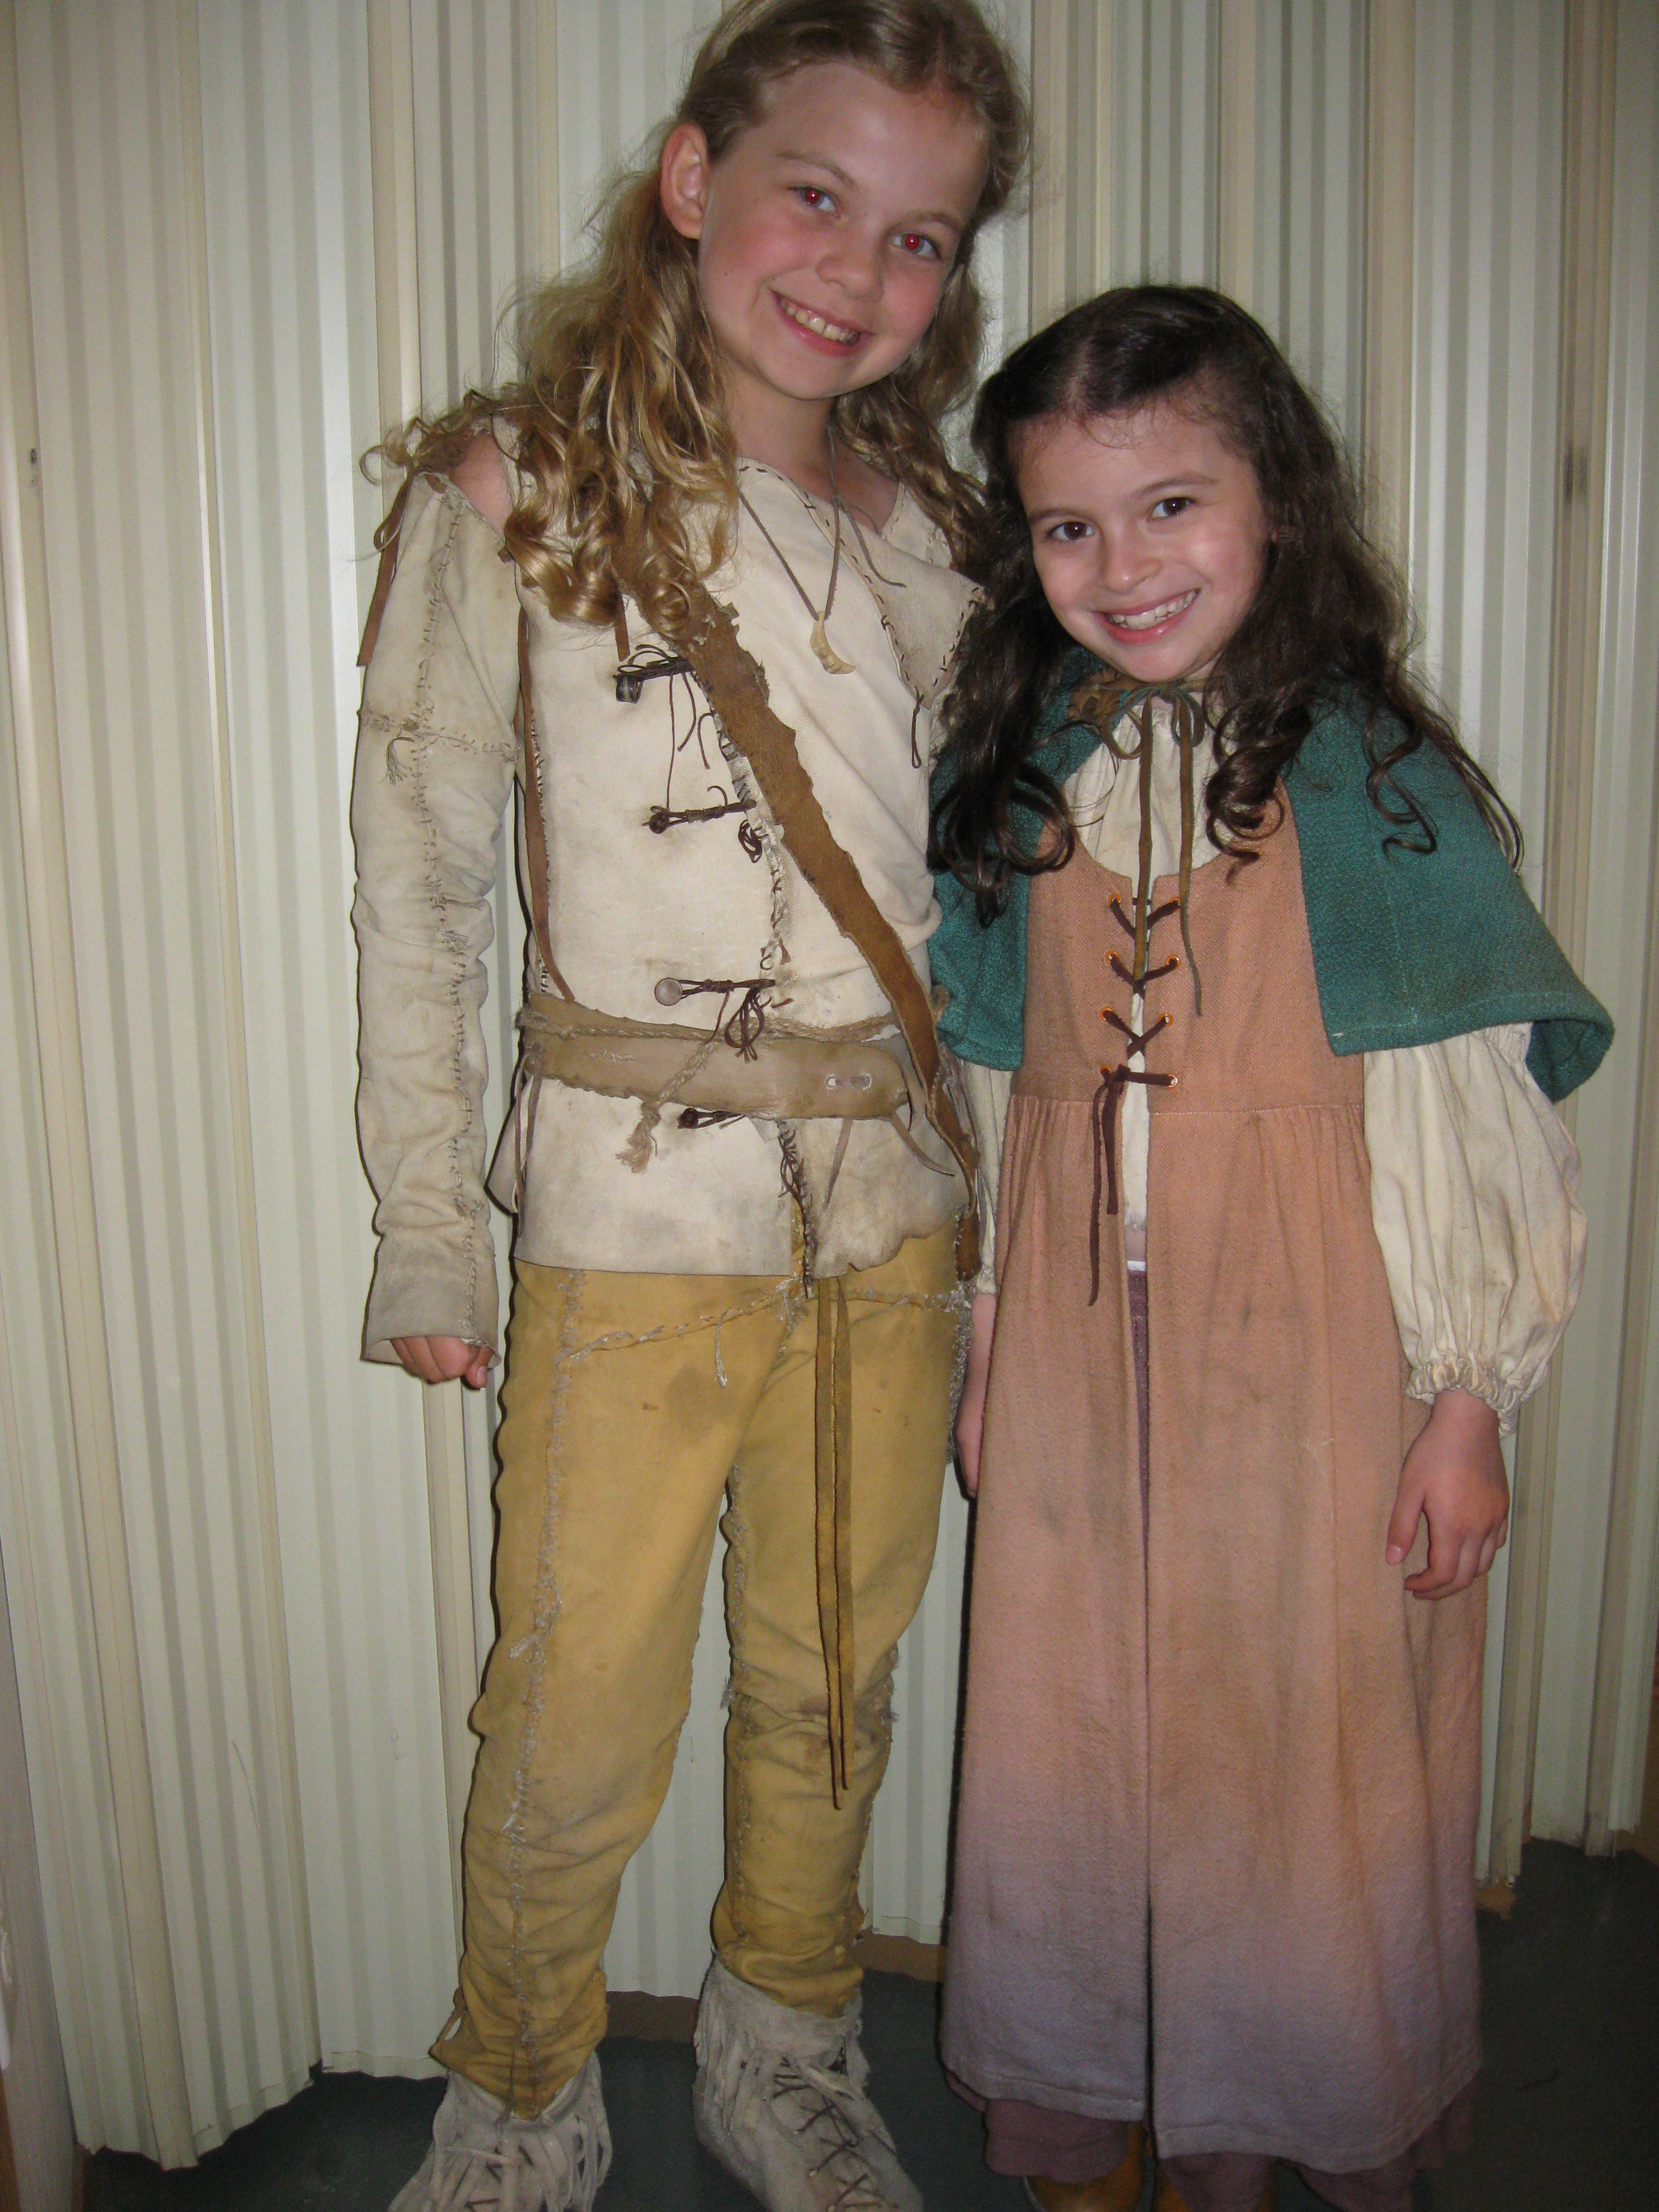 Dalila Bela & Megan Charpentier on the set of Red Riding Hood